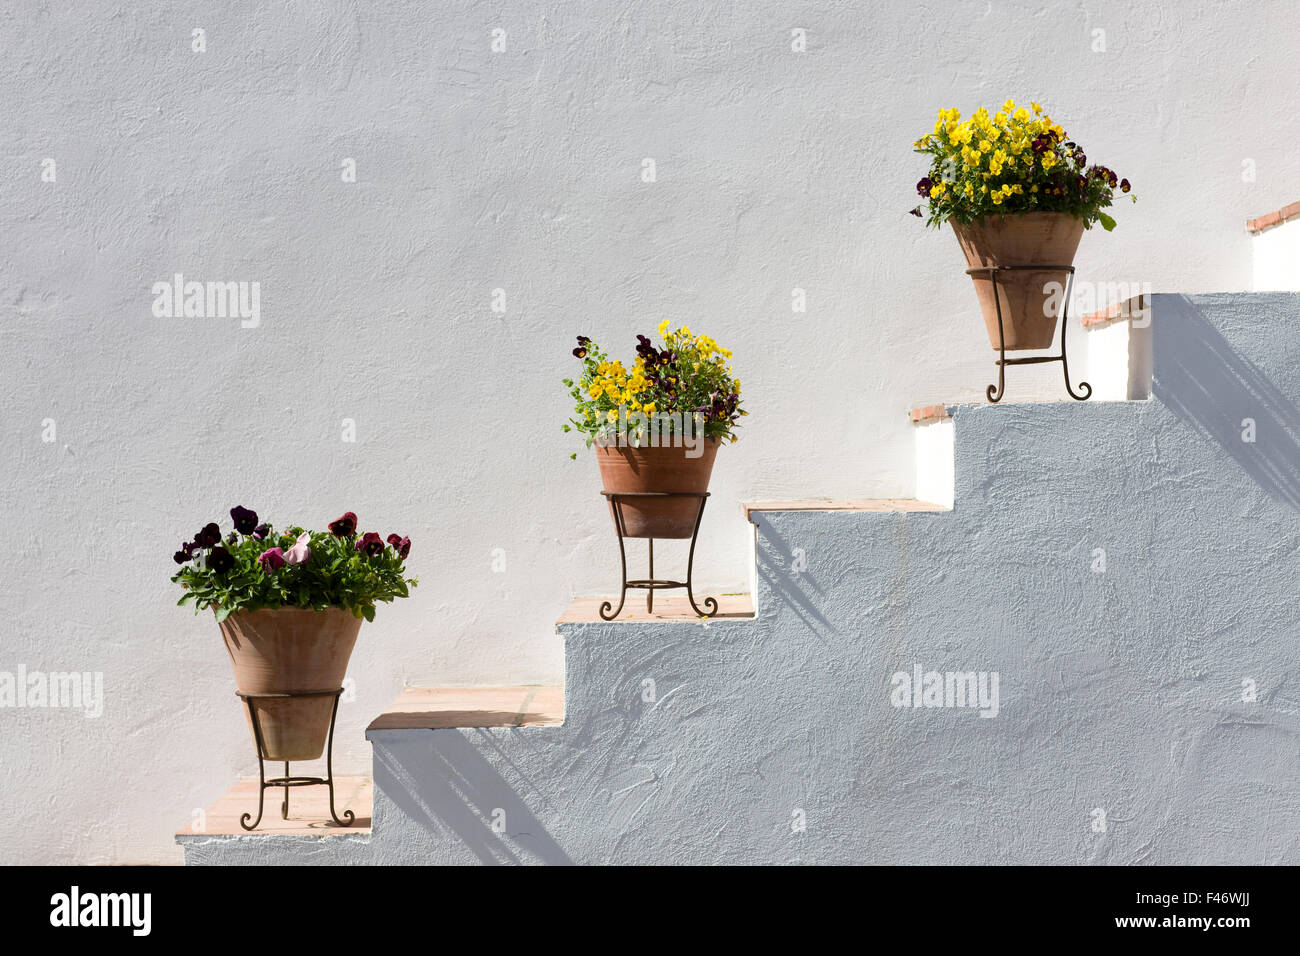 Stairs on a whitewashed house, Spain. Stock Photo